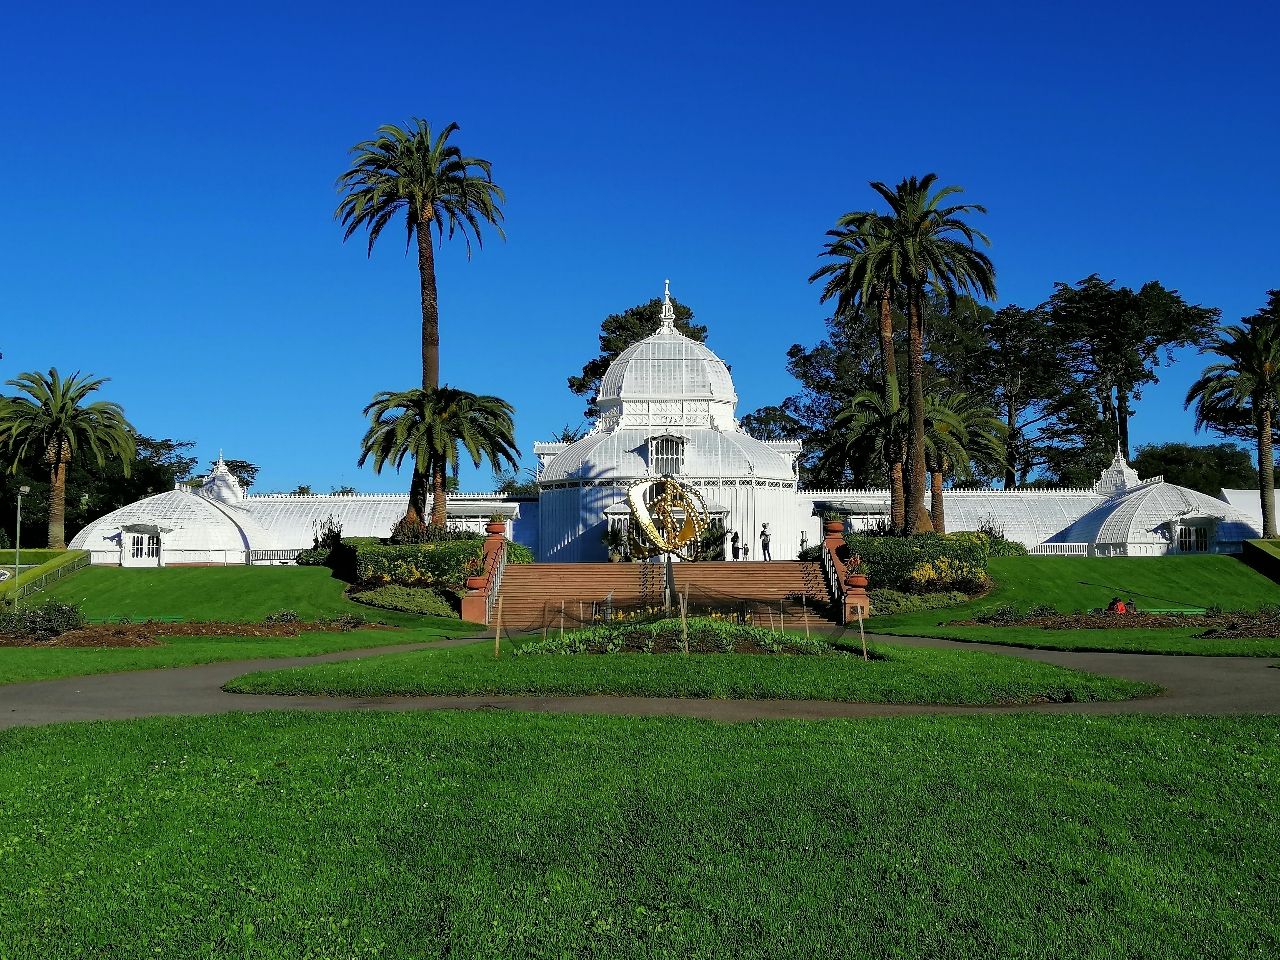 Conservatory of Flowers - From Golden Gate Park, United States